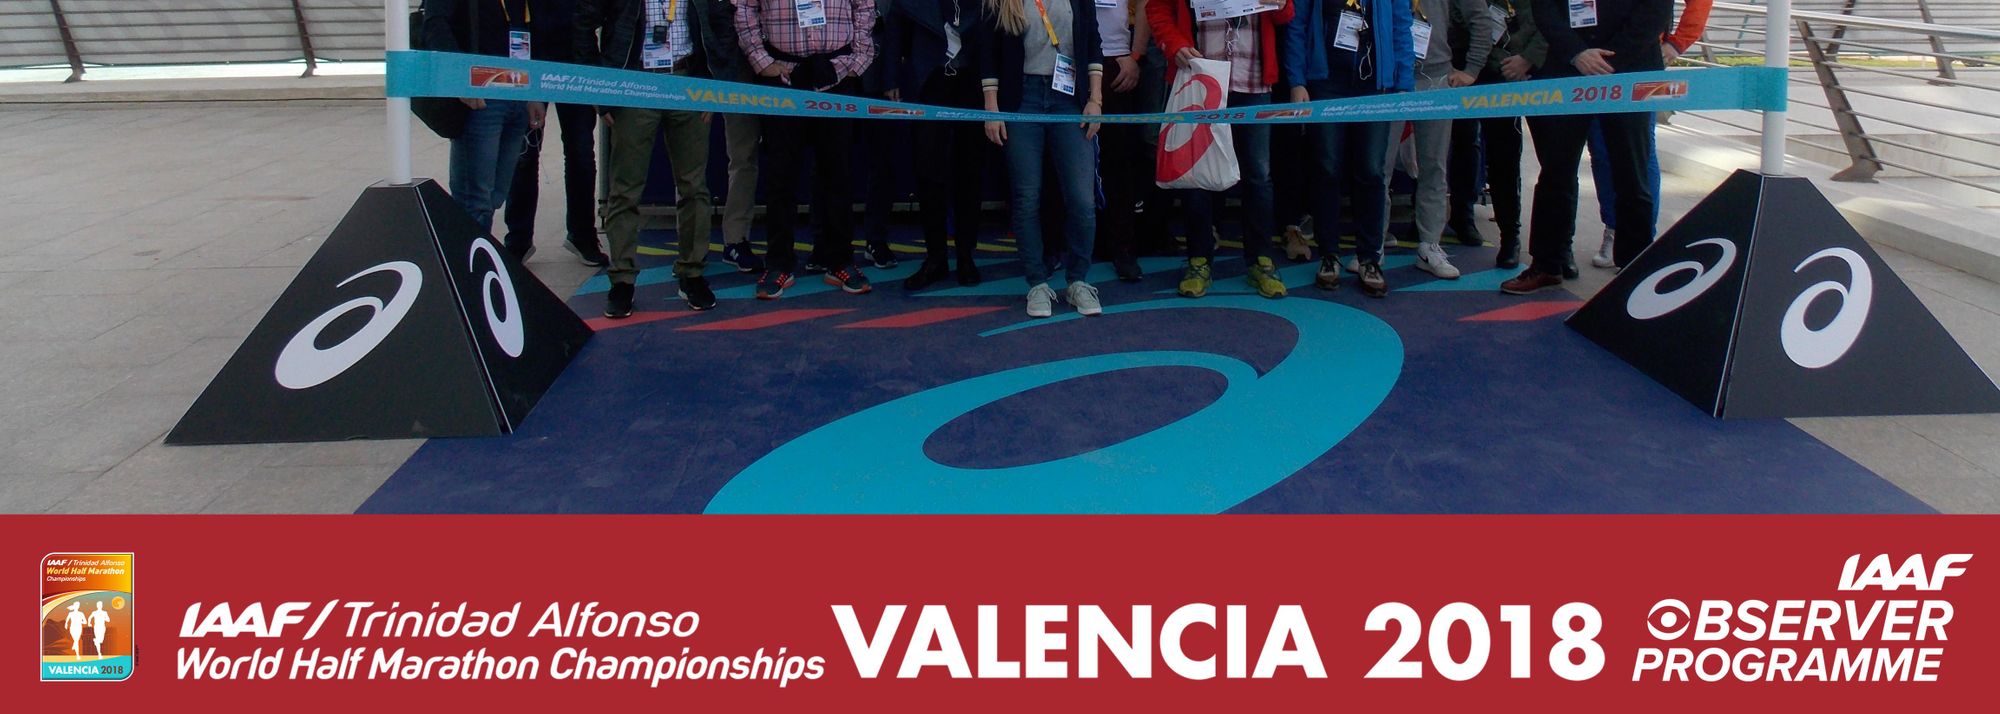 A fully booked group of 21 people participated in the Observer Programme that took place on the margins of the IAAF/Trinidad Alfonso World Half Marathon Championships Valencia 2018.